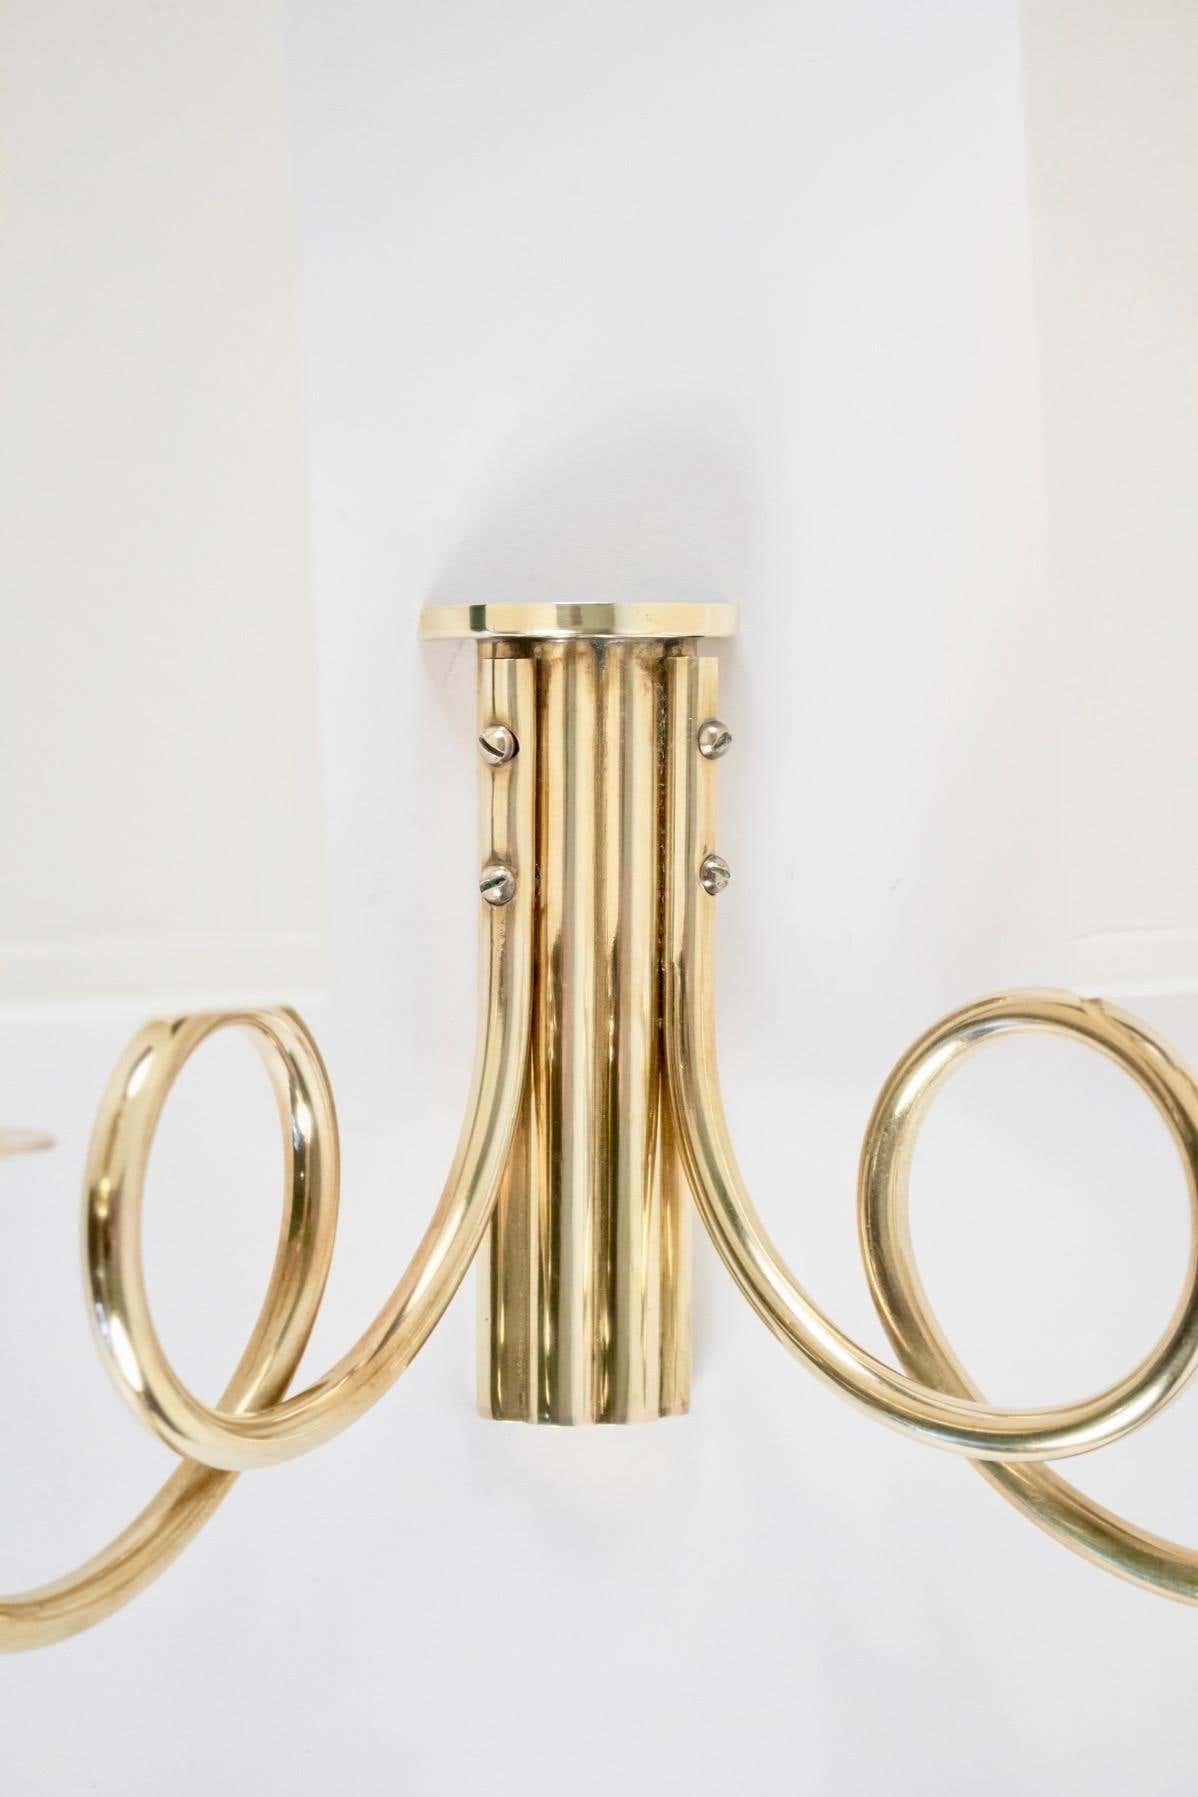 Pair of Maison Lunel wall lights from the 1950s,

Composed of a large wall plate in gilded brass on which are positioned two sconces formed by two rising rods, they are dressed in satin opal glass.
A small blackened brass plaque placed on the